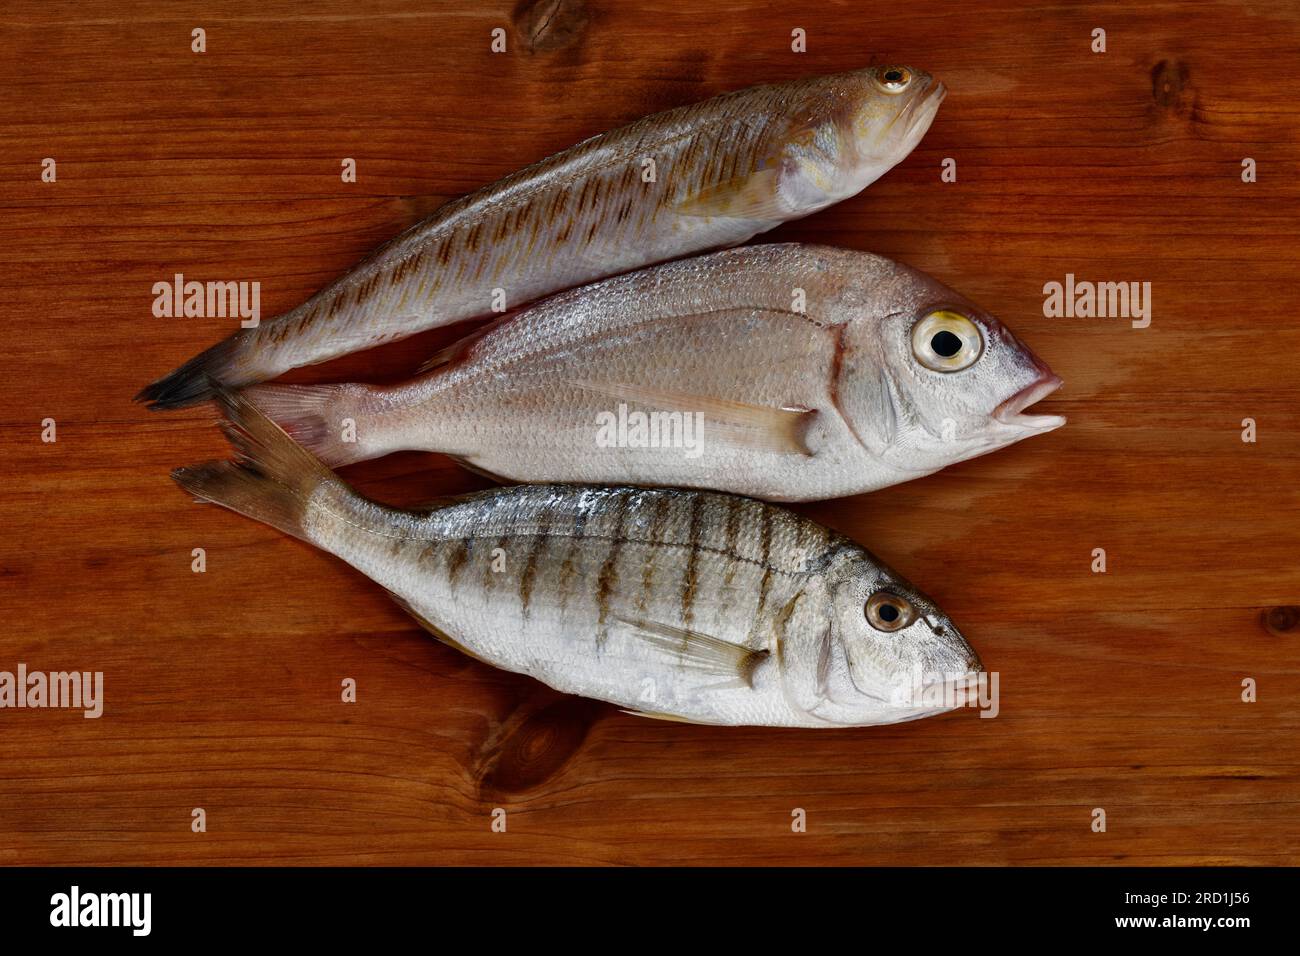 Uncooked common pandora fish , striped seabream and greeter weever on wooden table,Mediterranean fish with delicate flesh , Stock Photo